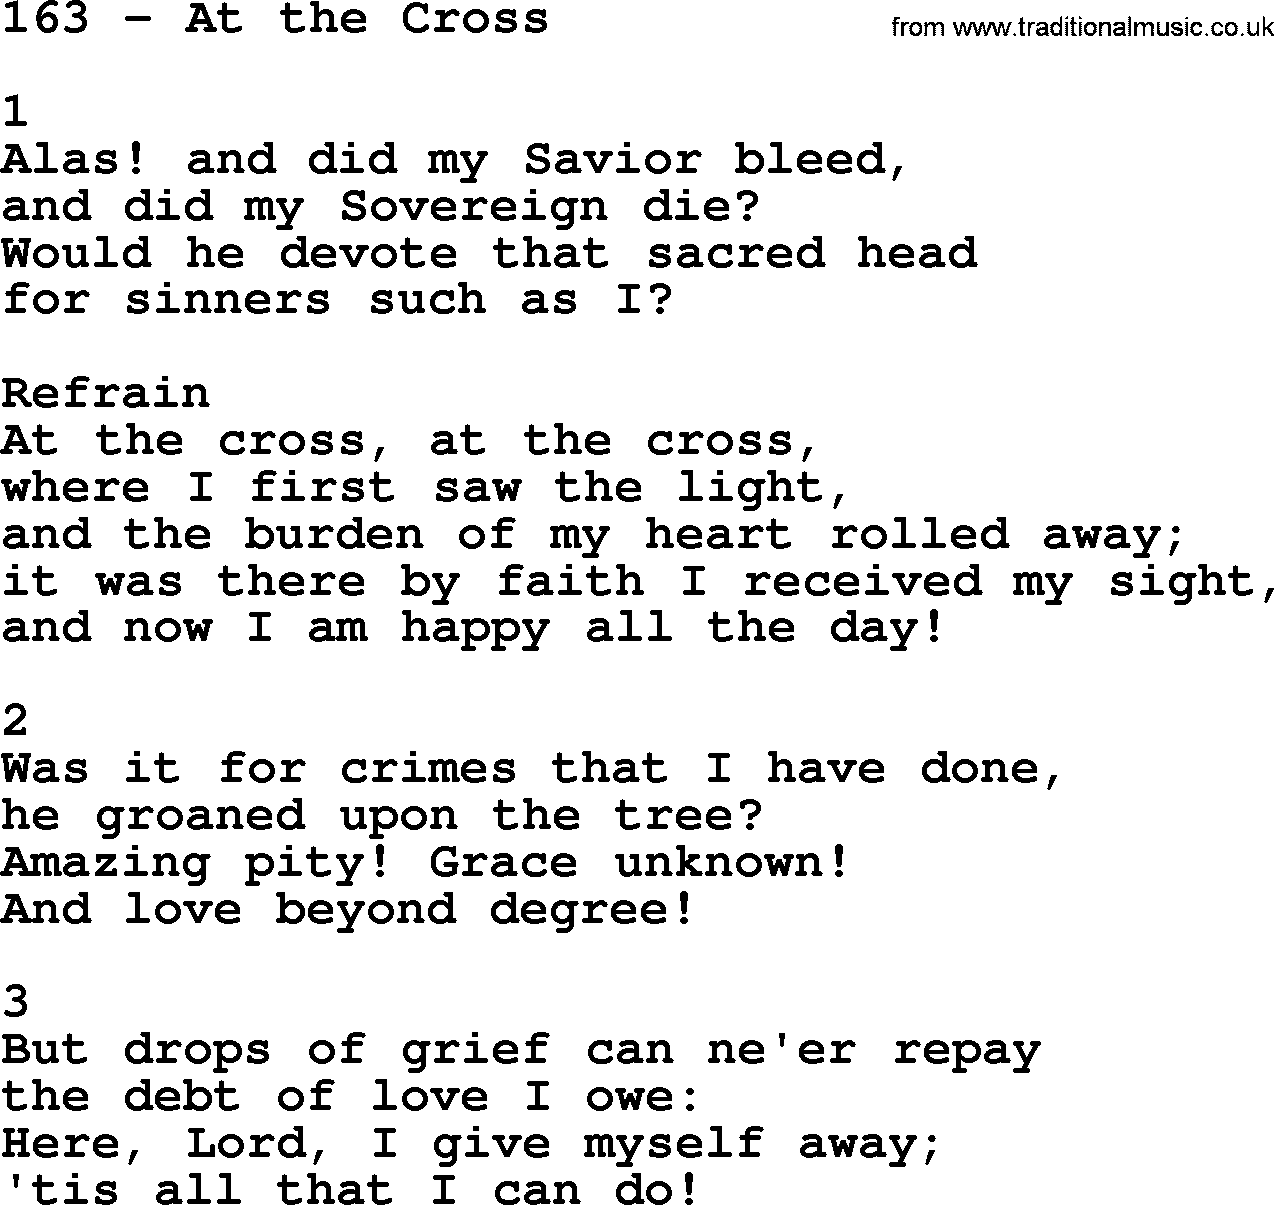 Complete Adventis Hymnal, title: 163-At The Cross, with lyrics, midi, mp3, powerpoints(PPT) and PDF,